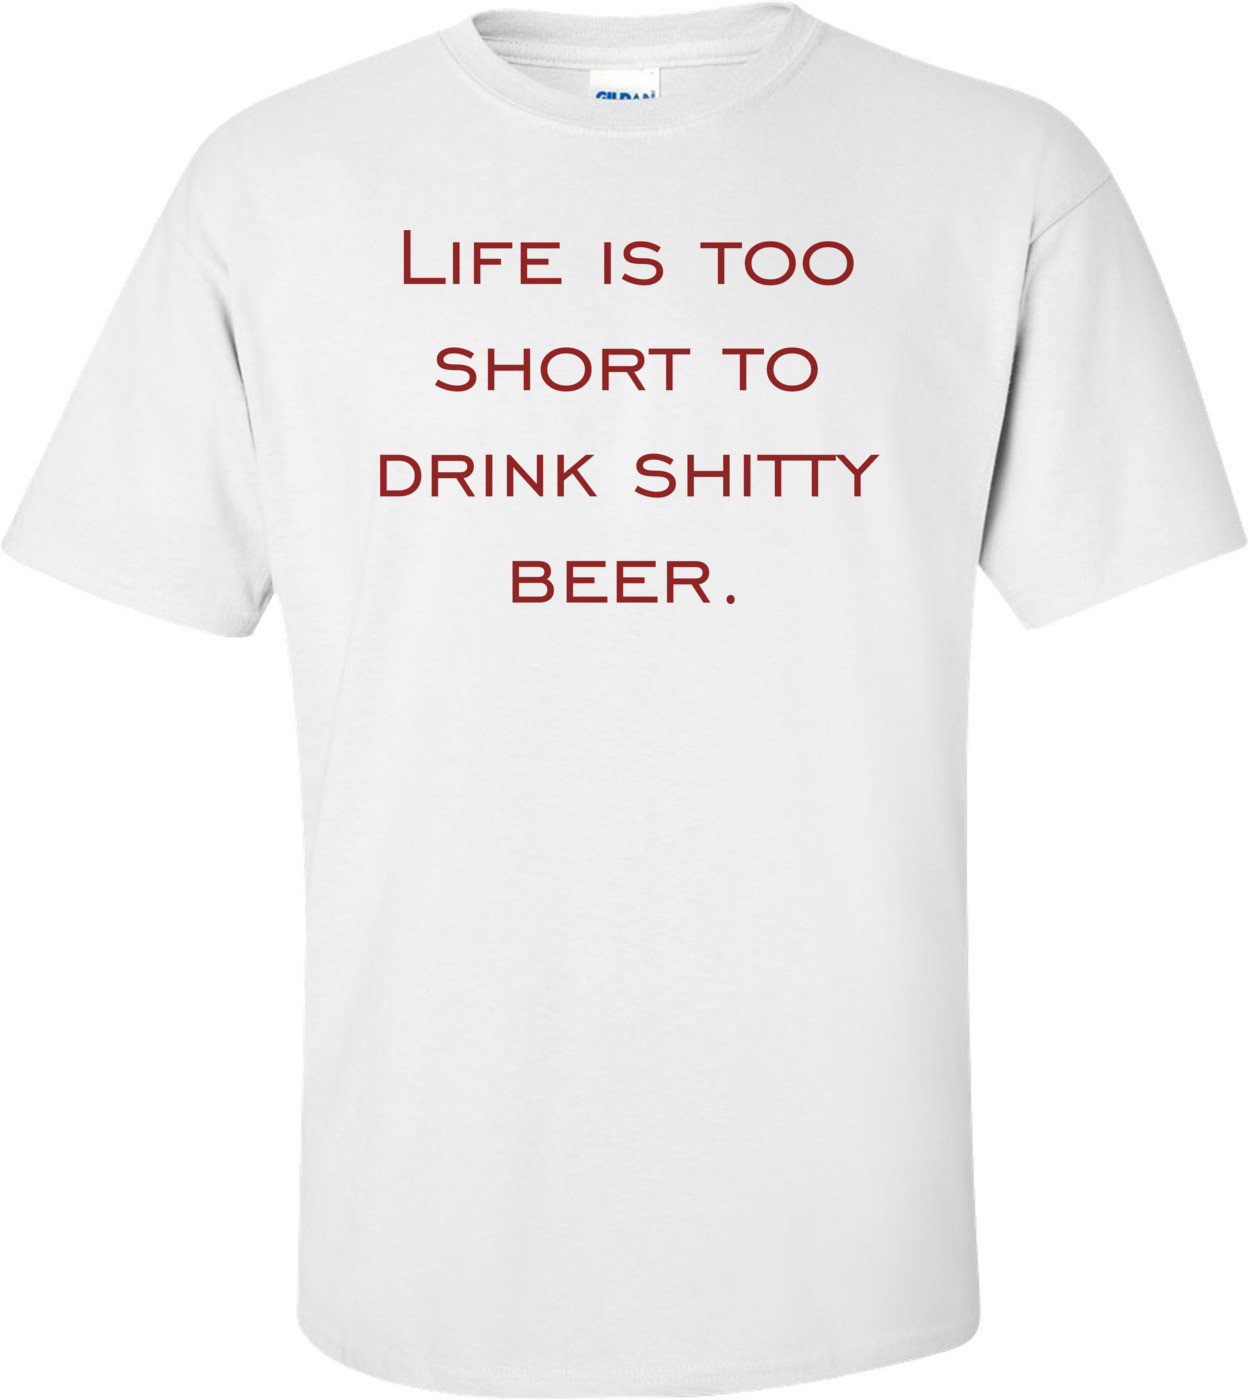 Life is too short to drink shitty beer.